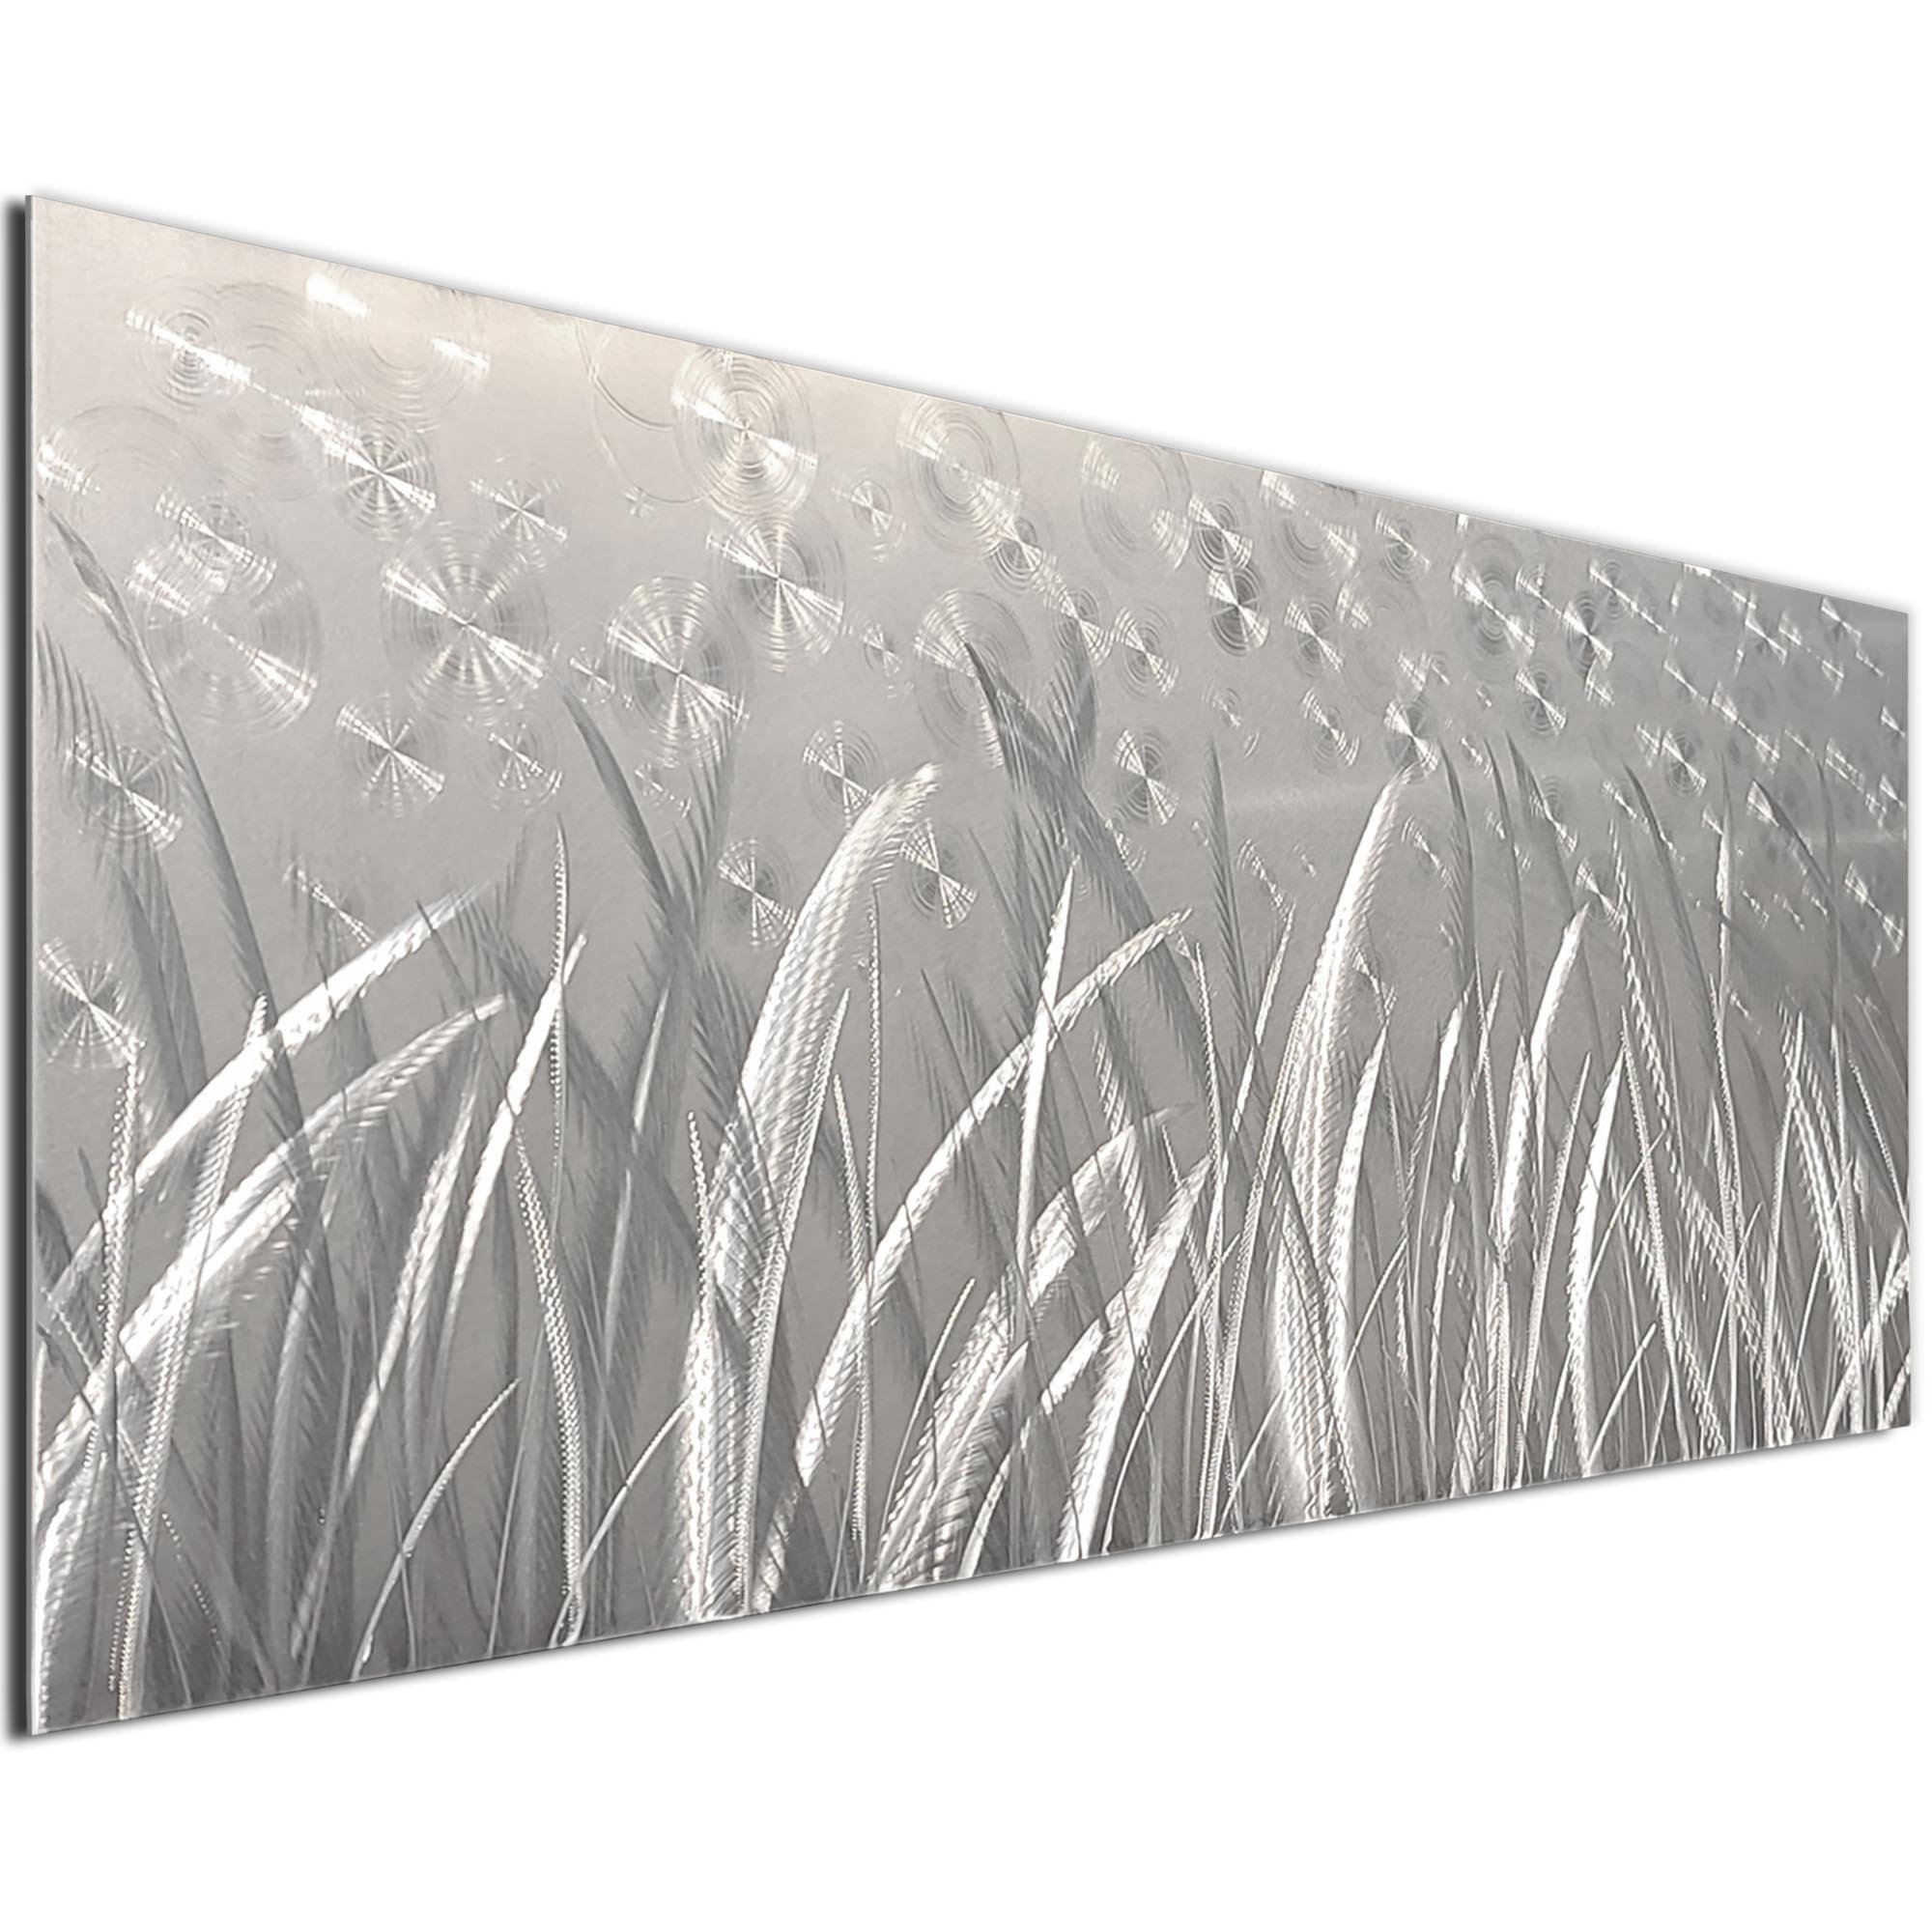 Starlight 60 by Carlos Jacobs - Metal Wall Art, Silver Metal Painting (60x24in.) - Image 2